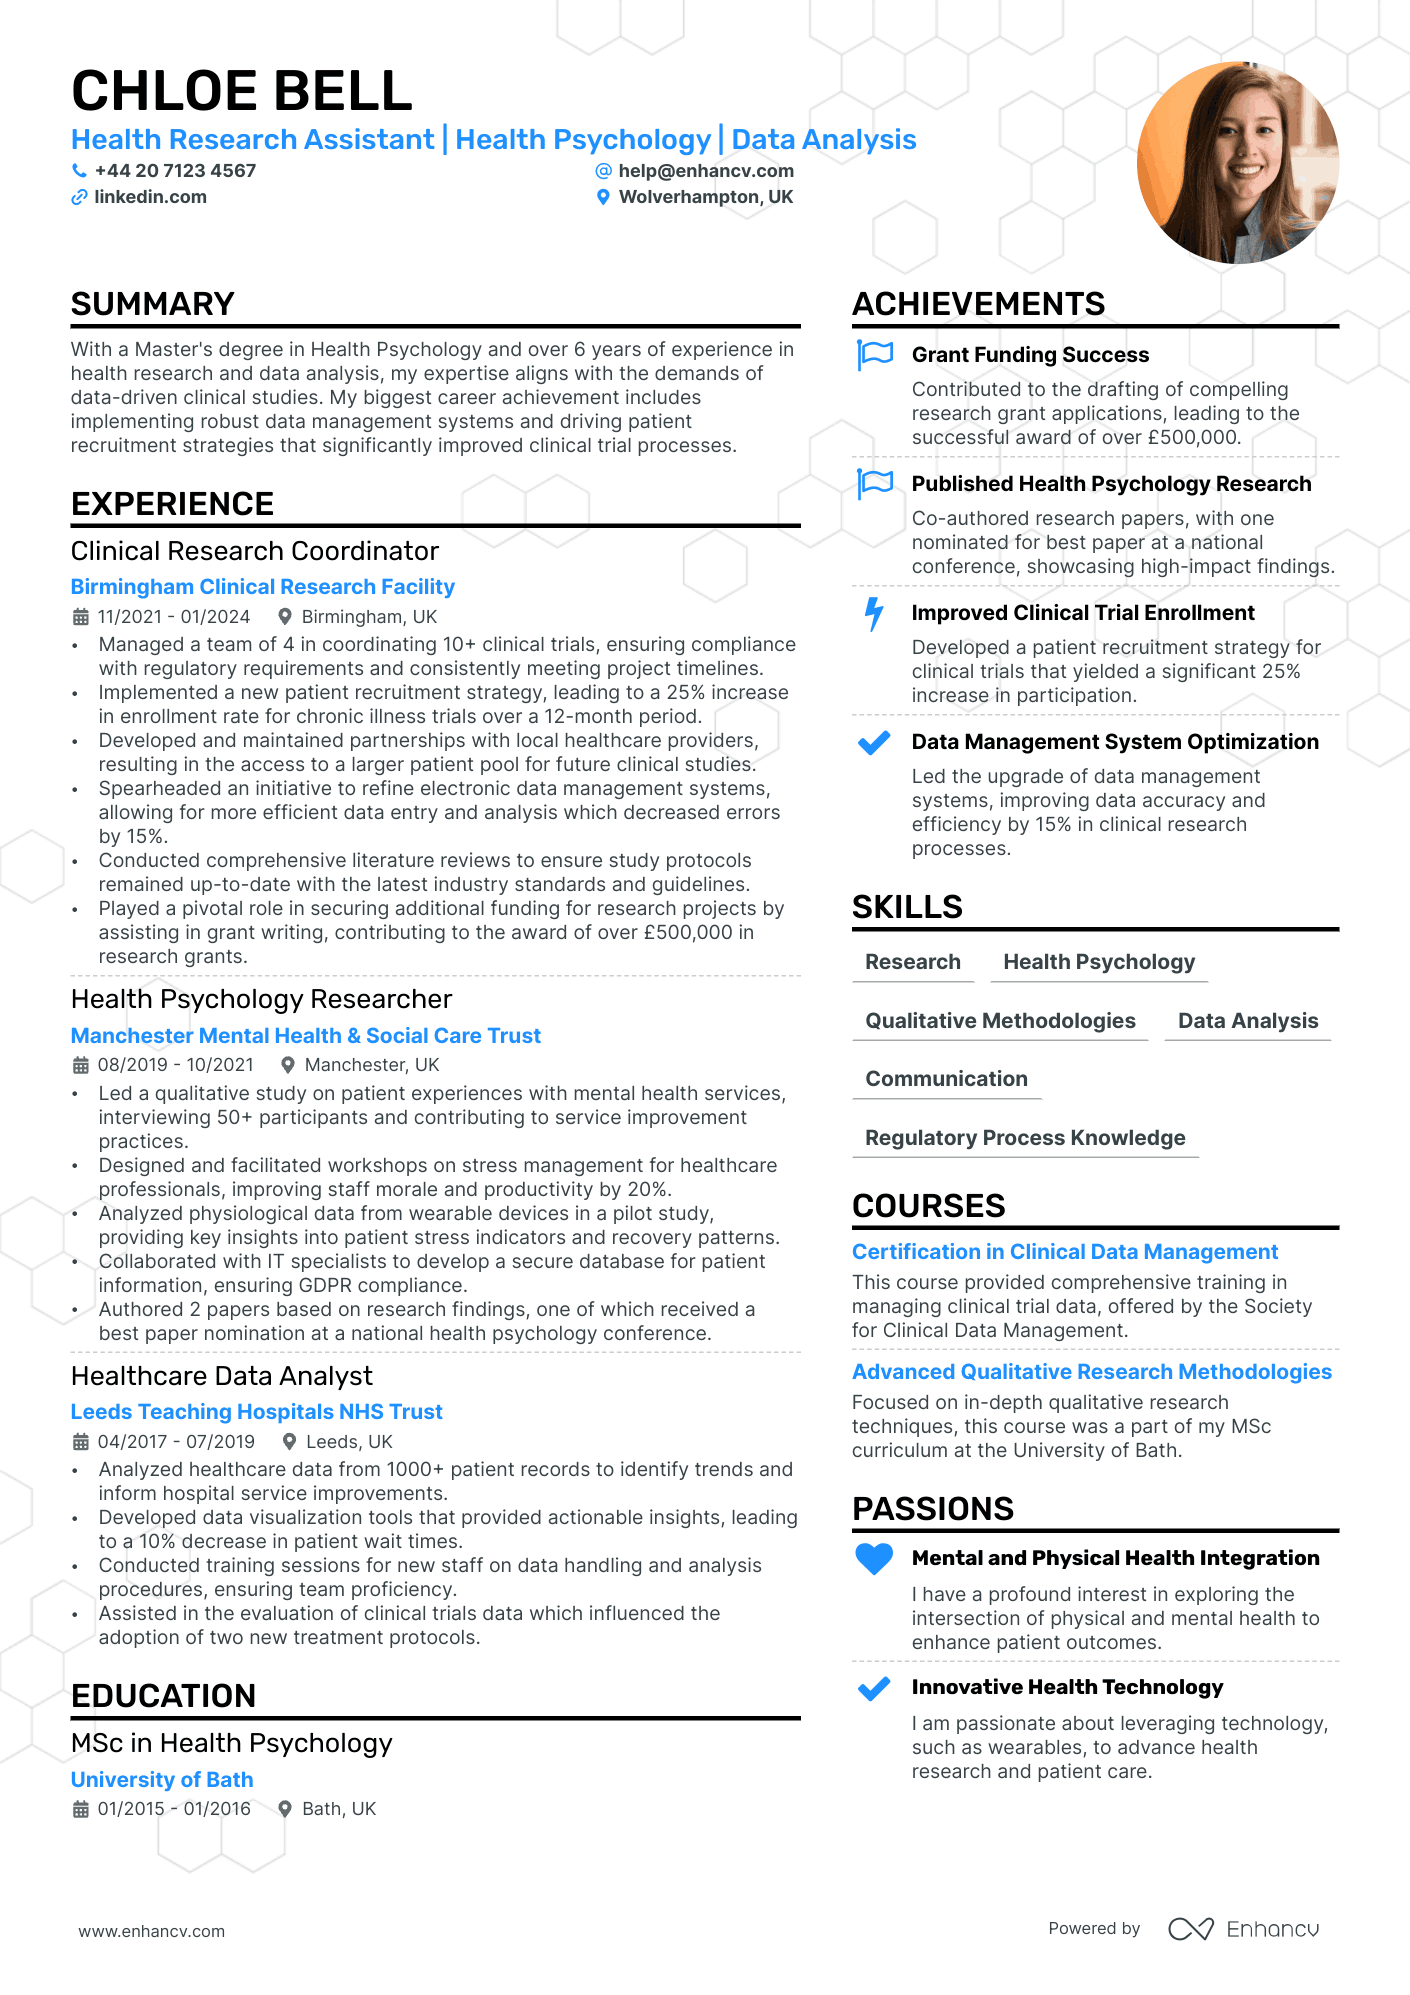 Research Assistant cv example